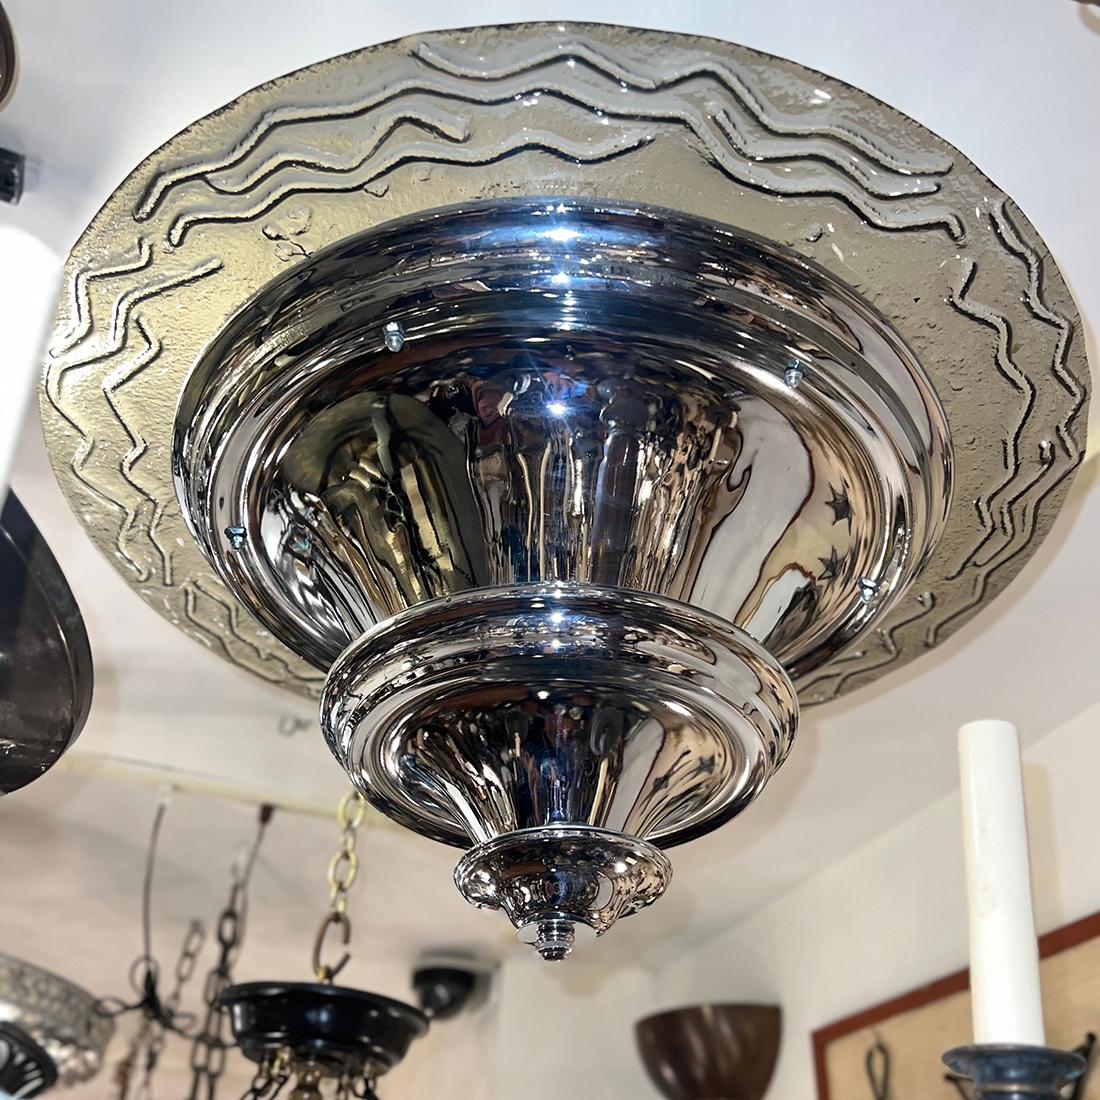 A circa 1960's Italian light fixture with molded glass inset in a smoke color.
Four candelabra interior lights.
 
Measurements:
Current Drop: 21.5